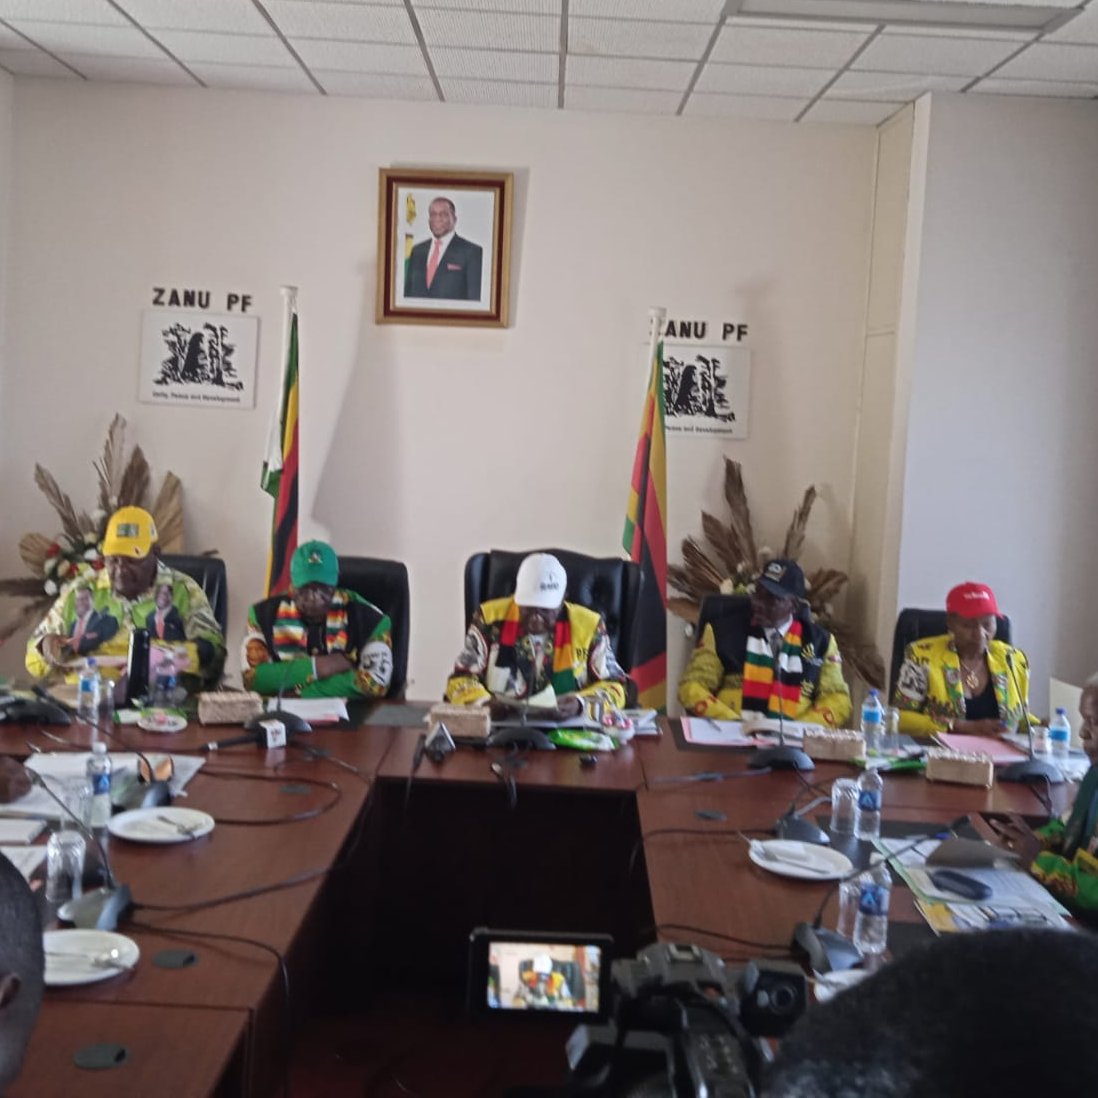 'My government is determined to address speculative behaviour causing price instability in Zimbabwe.This must see us continuing to improve the lives of citizens.' @edmnangagwa @ZANUPF_Official